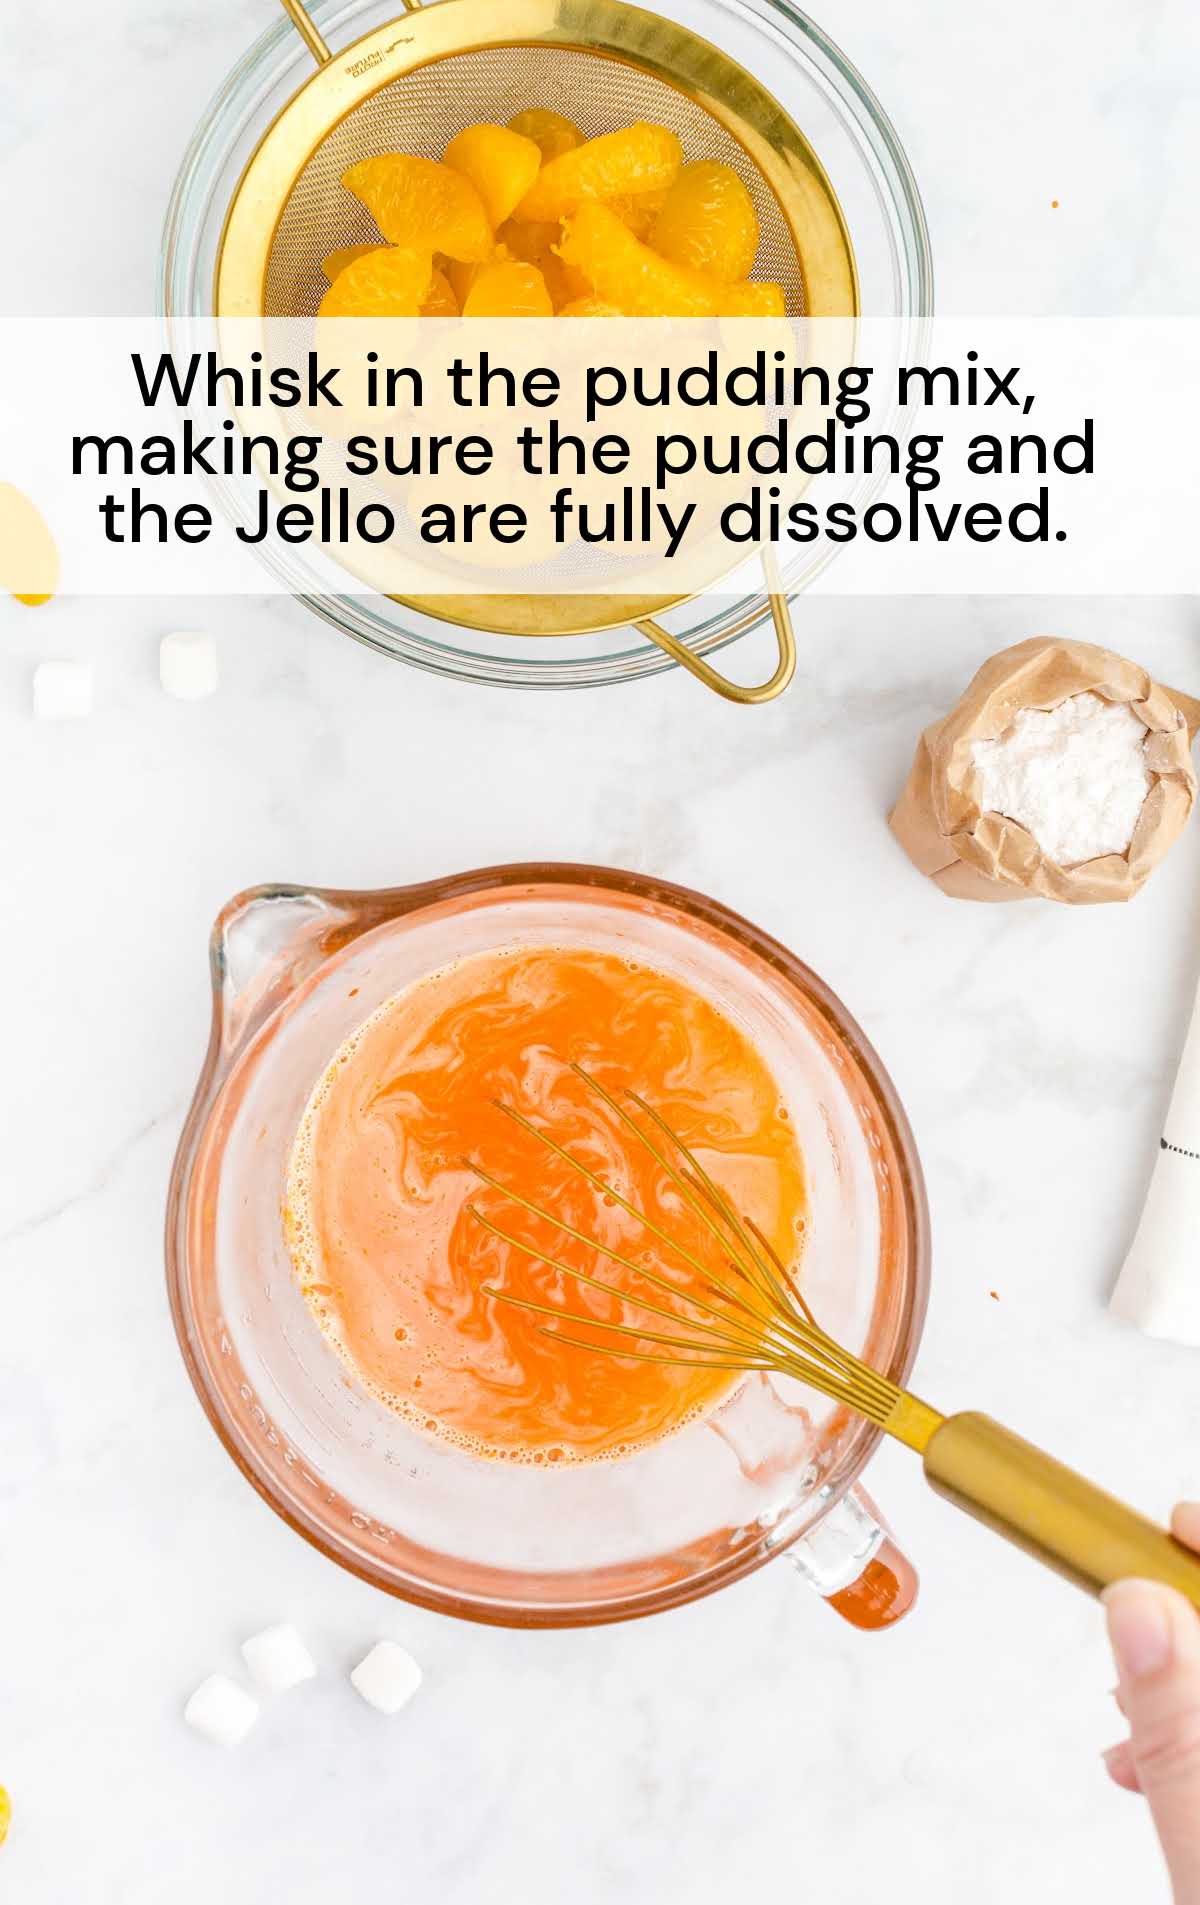 pudding mix and jello whisked together in a cup